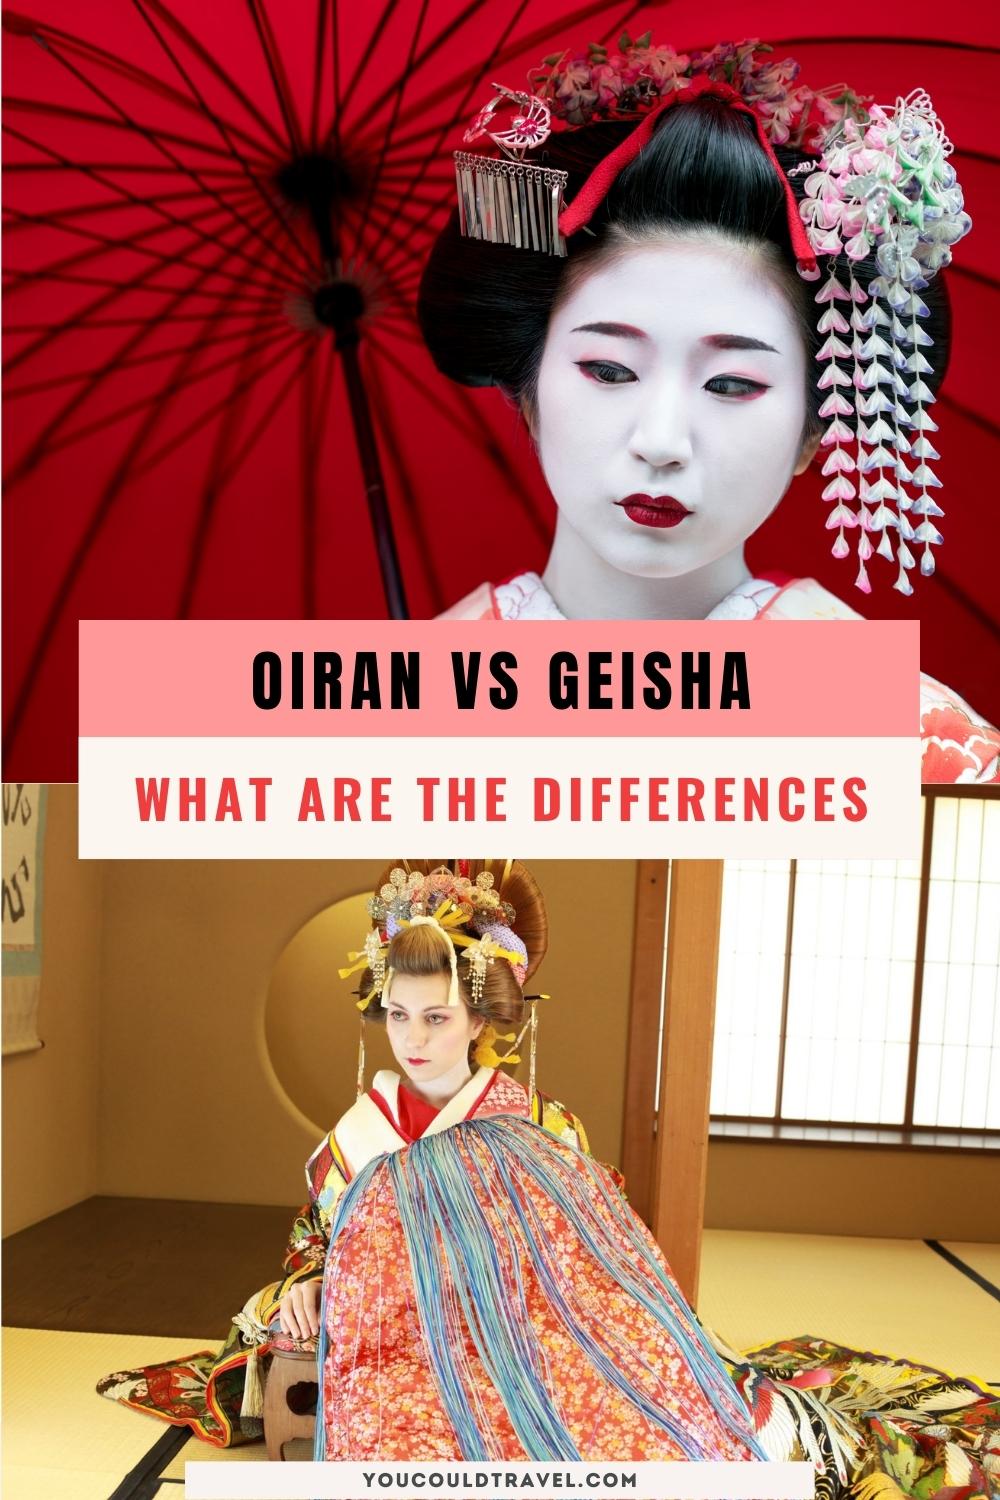 Oiran vs Geisha - How are they different